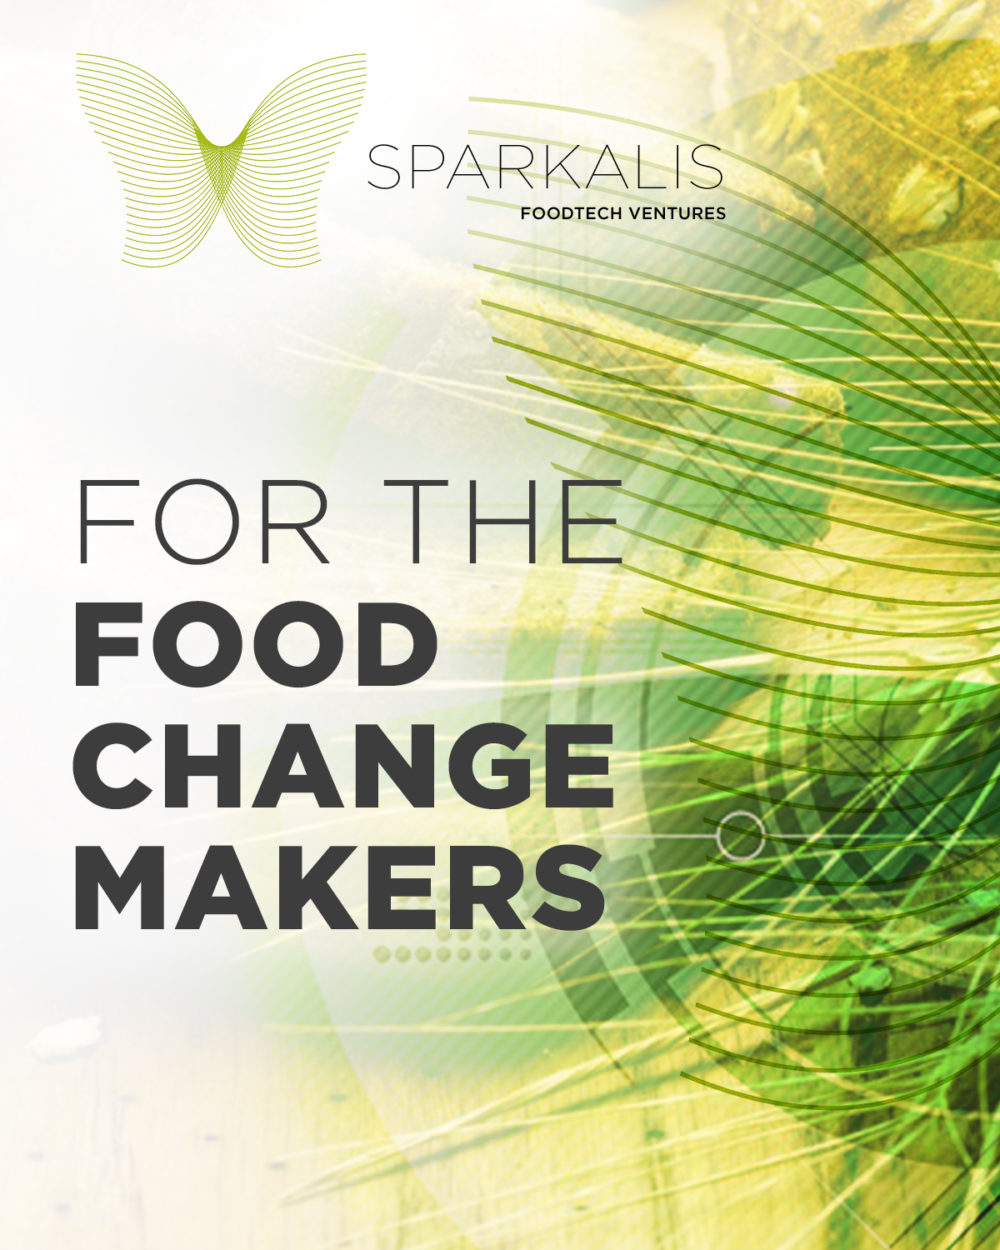 Puratos is launching new FoodTech ventures called Sparkalis